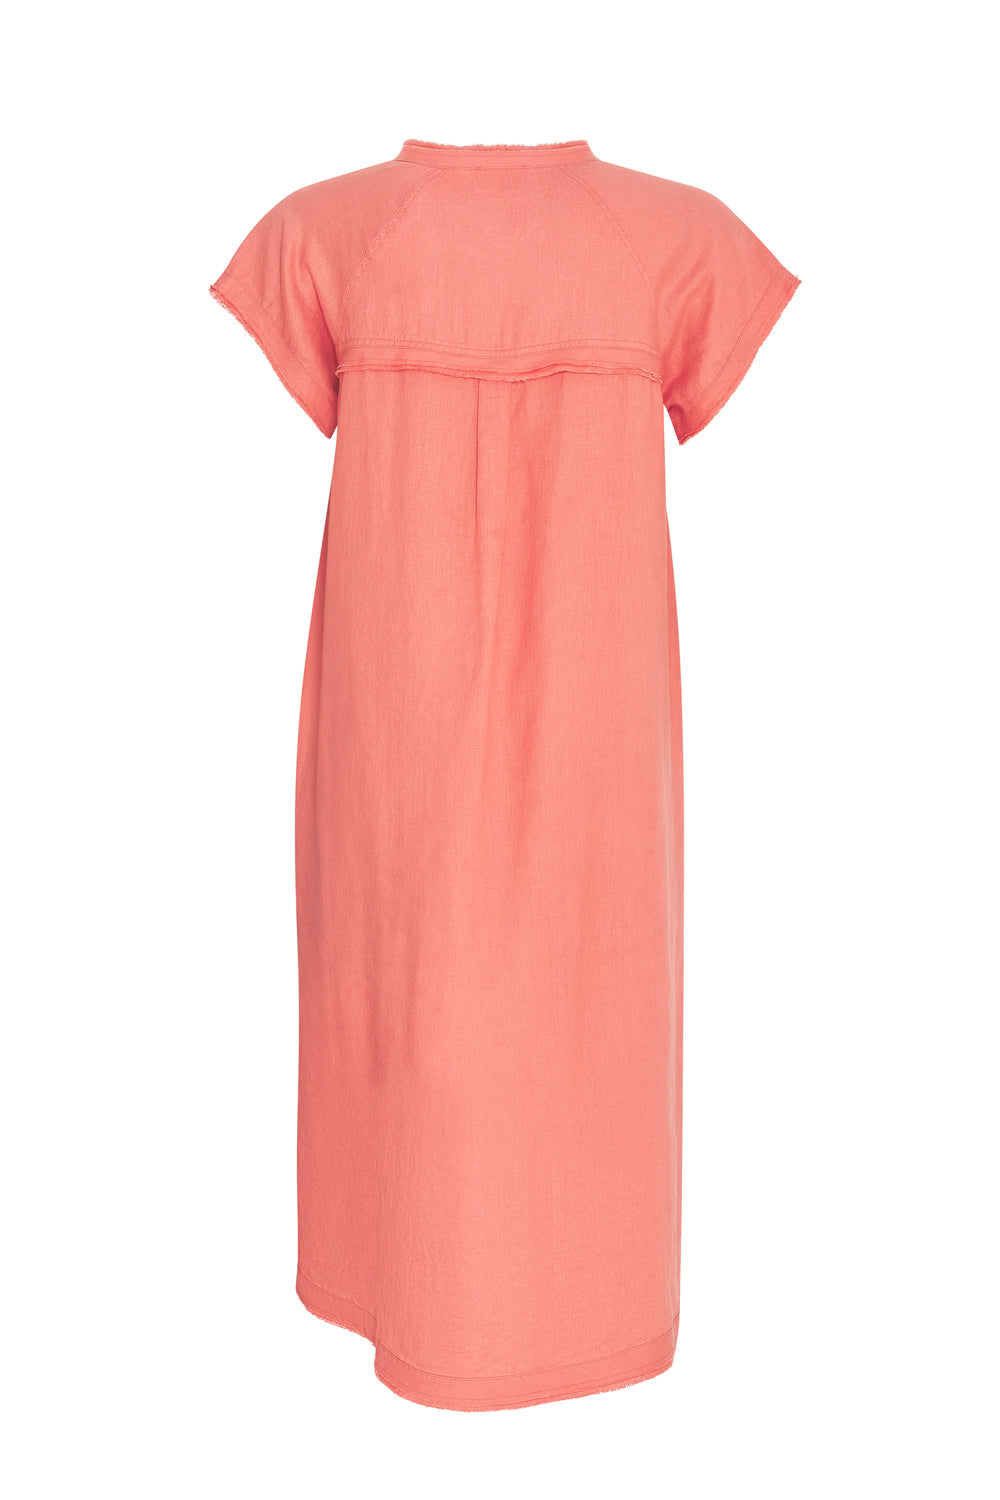 Madly Sweetly by Loobies Story Linen Let Live Shift Dress Persimmon s832pl